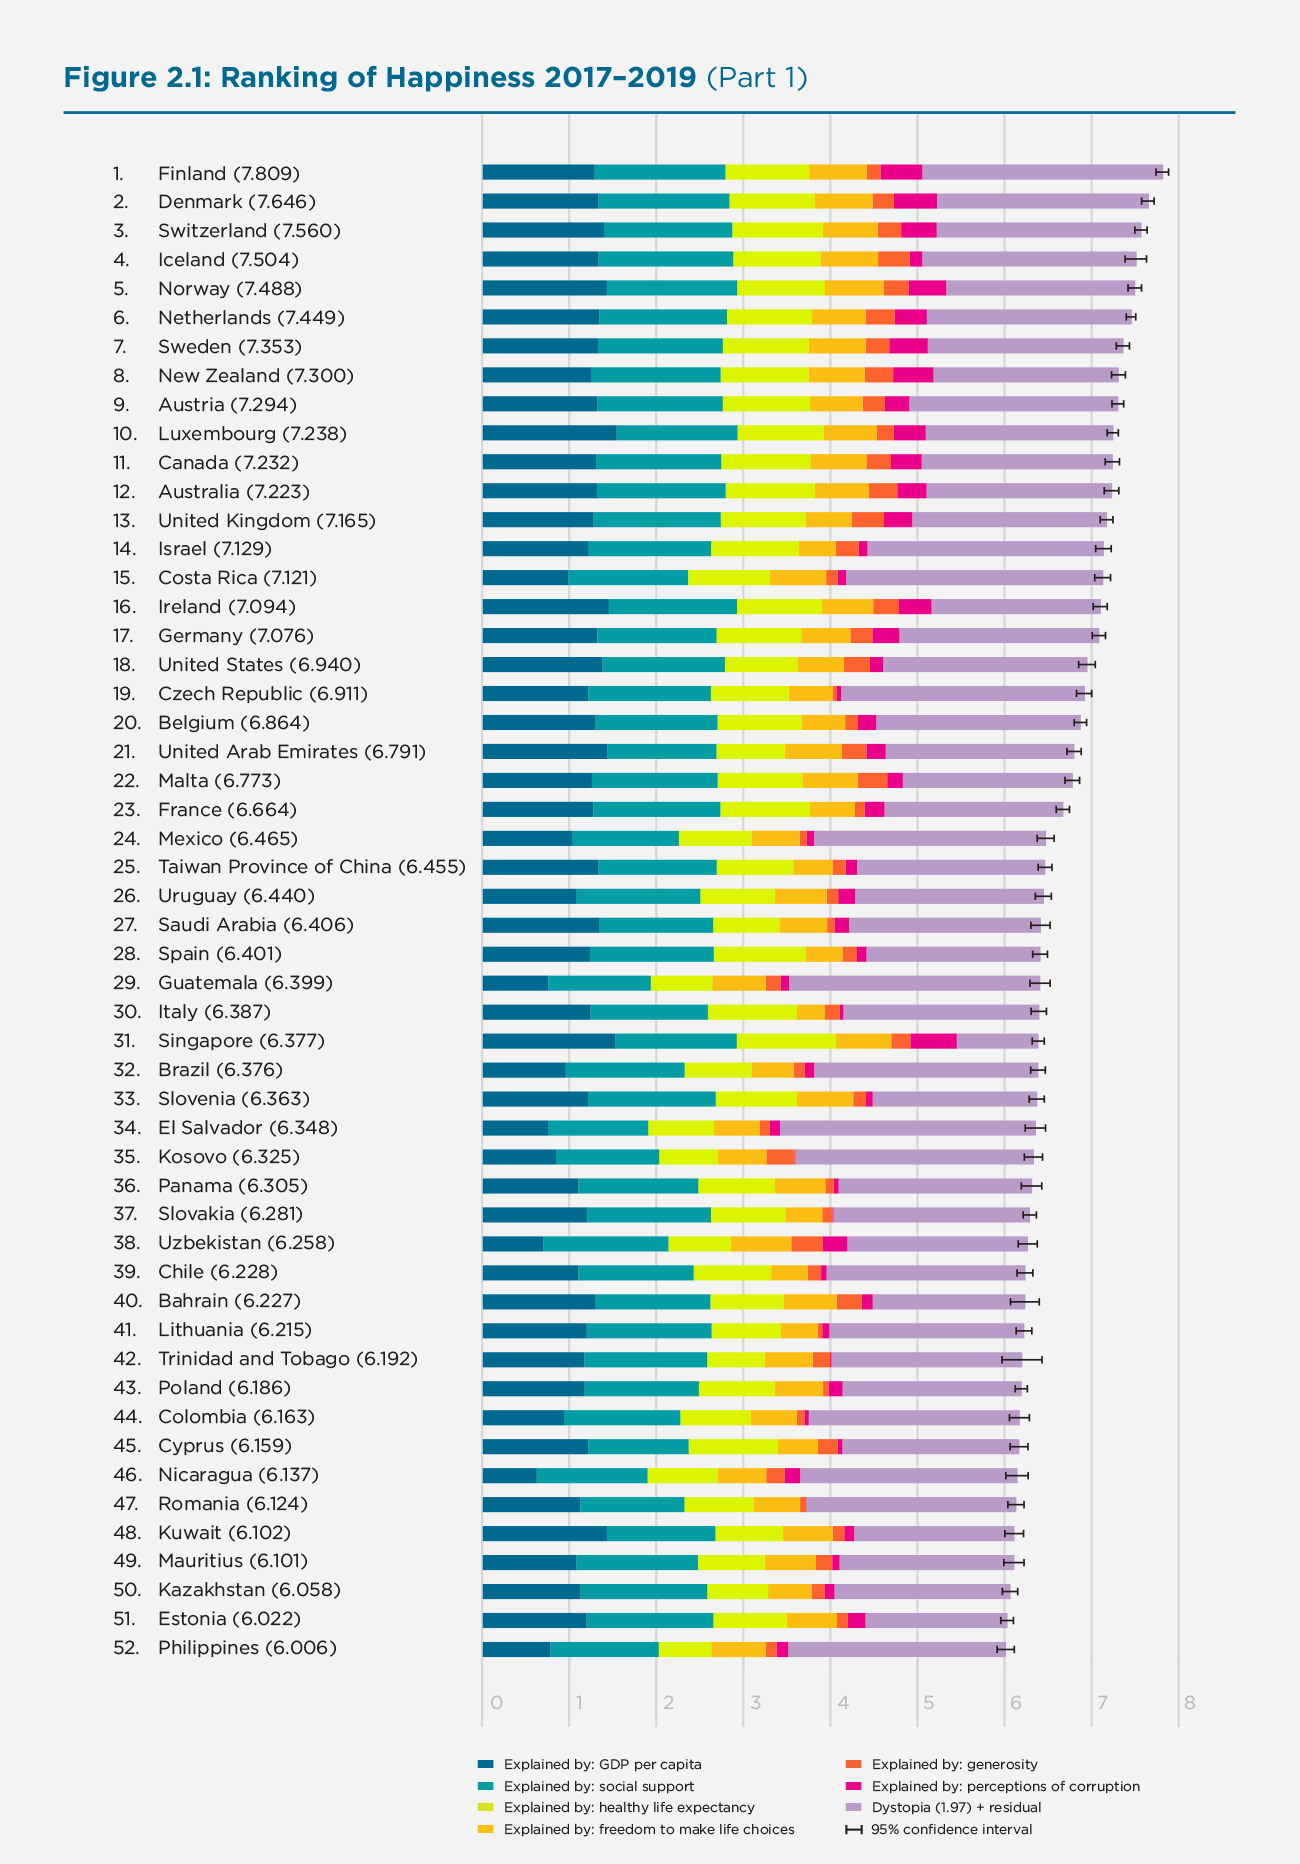 World Happiness Index: Muslim countries are low in Happiness